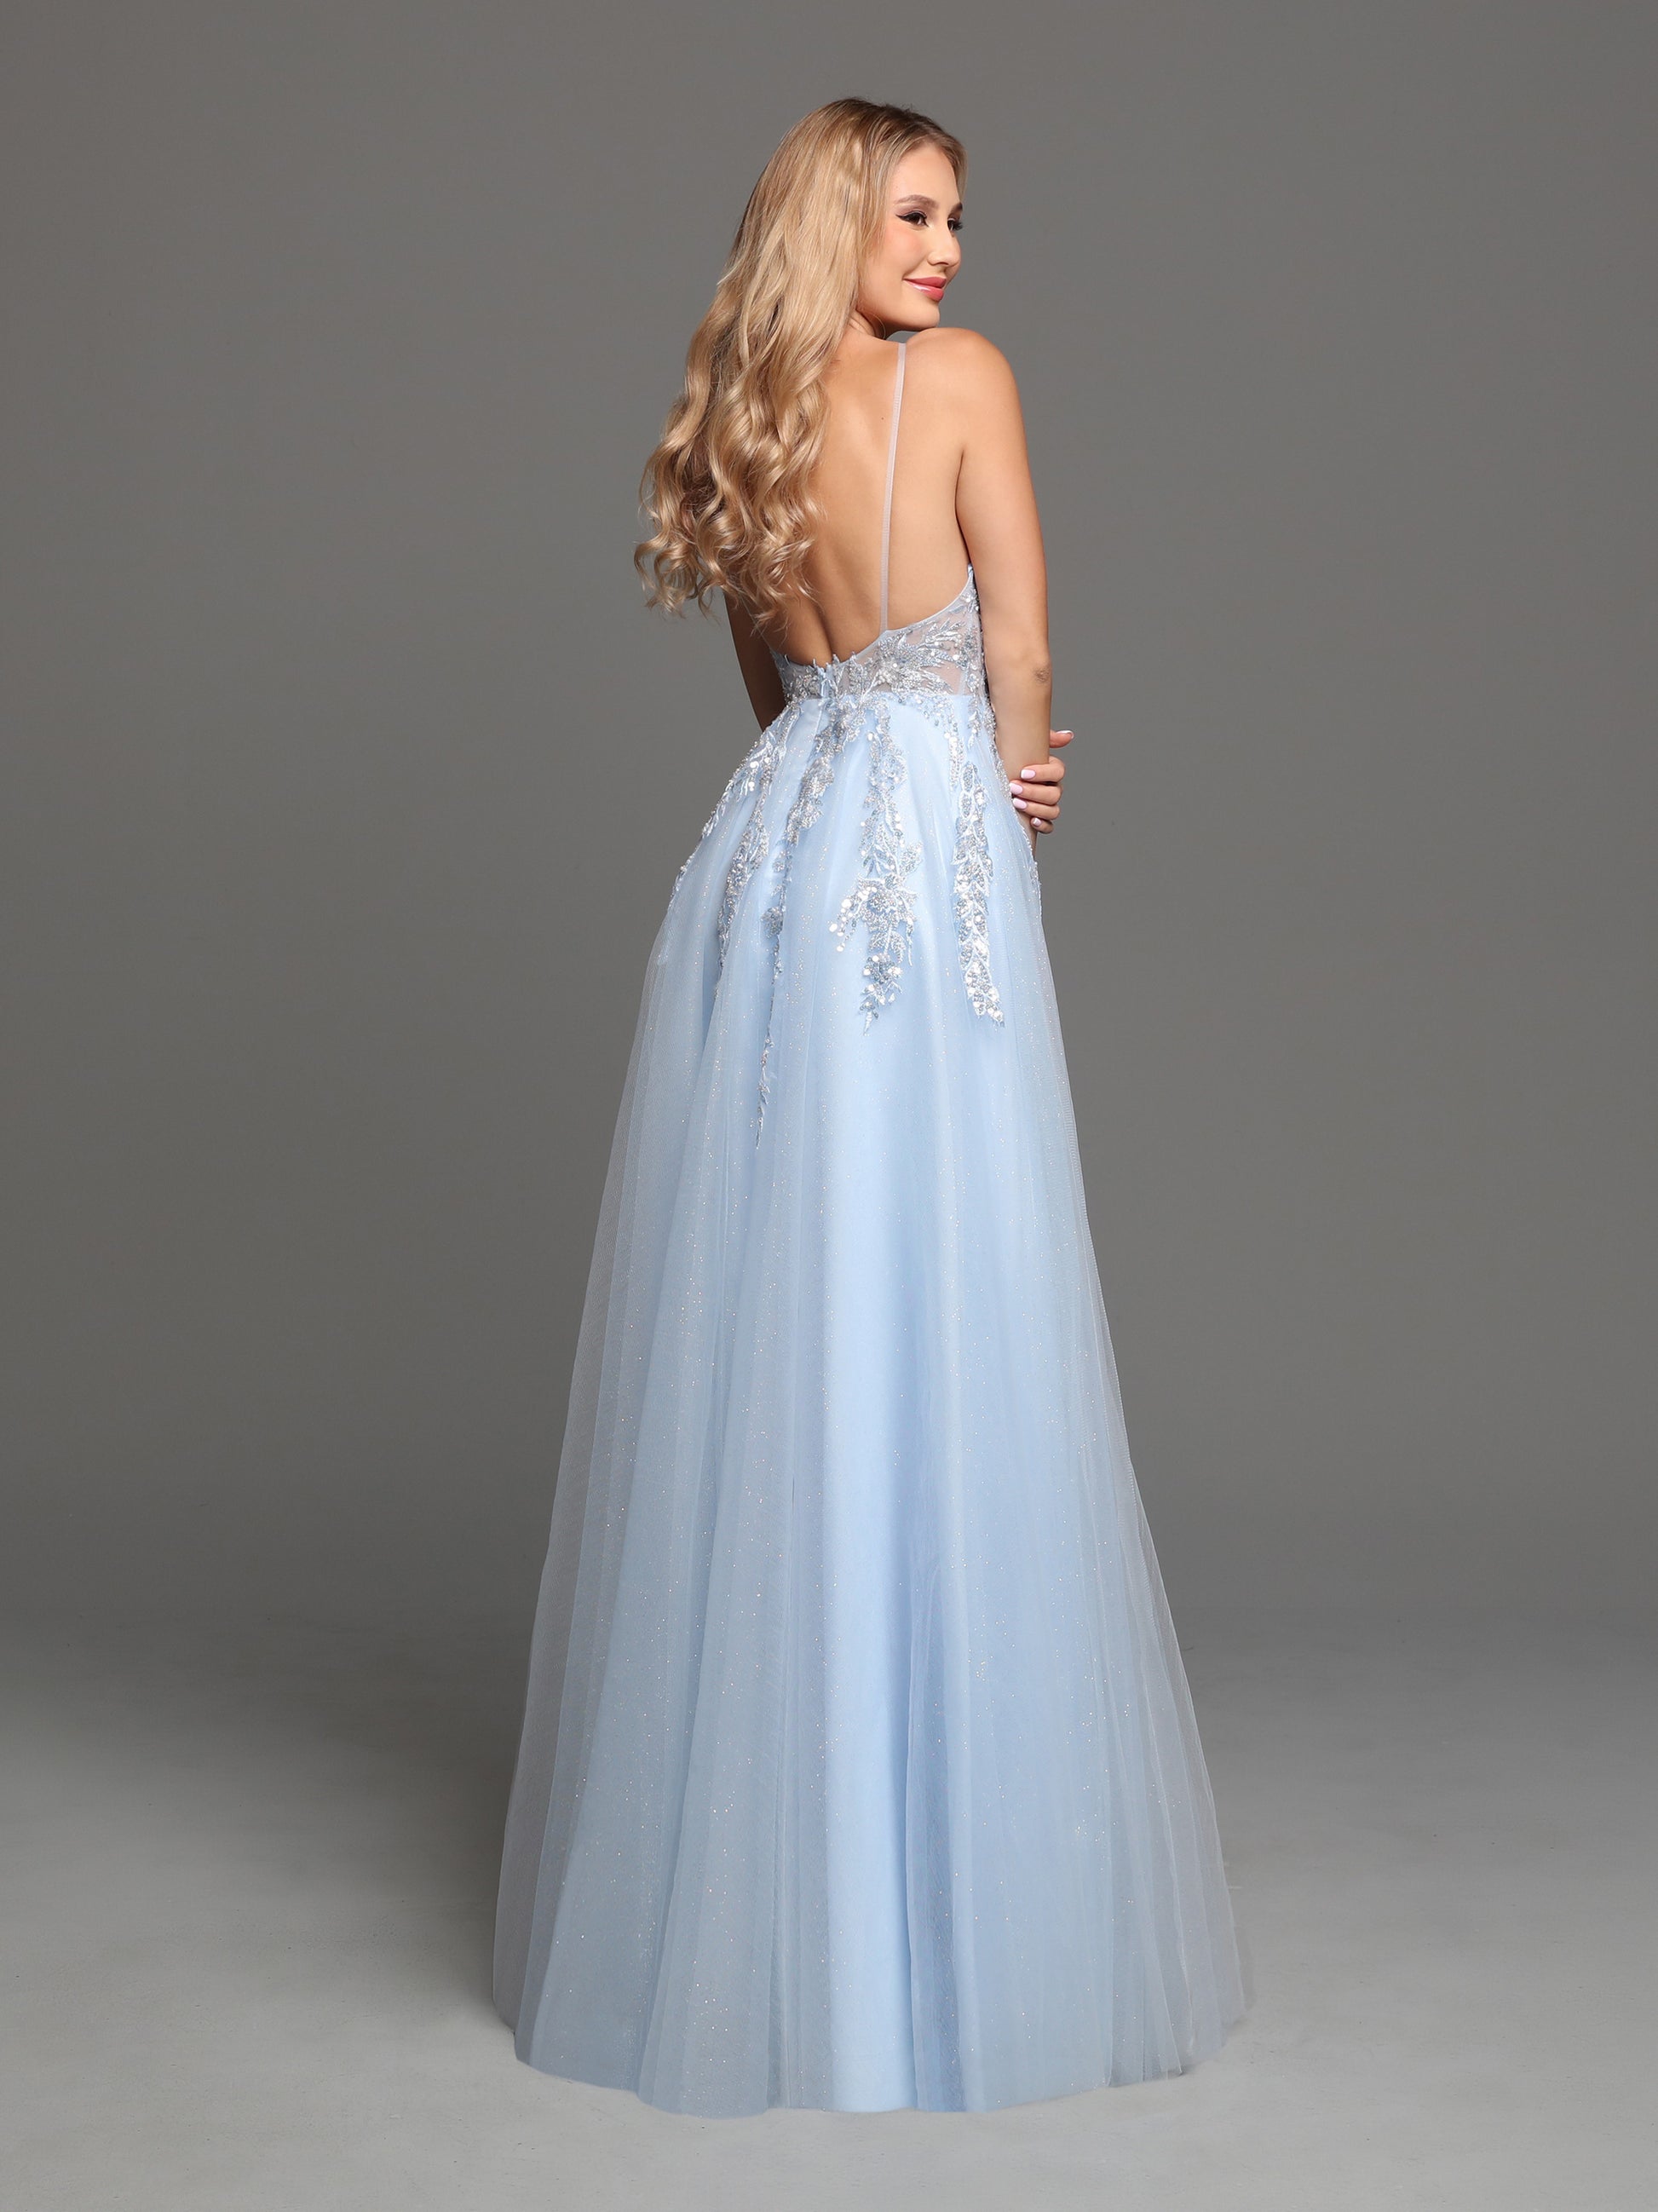 Sparkle Prom 72279 Sheer A Line Shimmer Ballgown Prom Dress Sequin Bodice V Neck Gown  Sizes: 0-20  Colors: Baby Blue